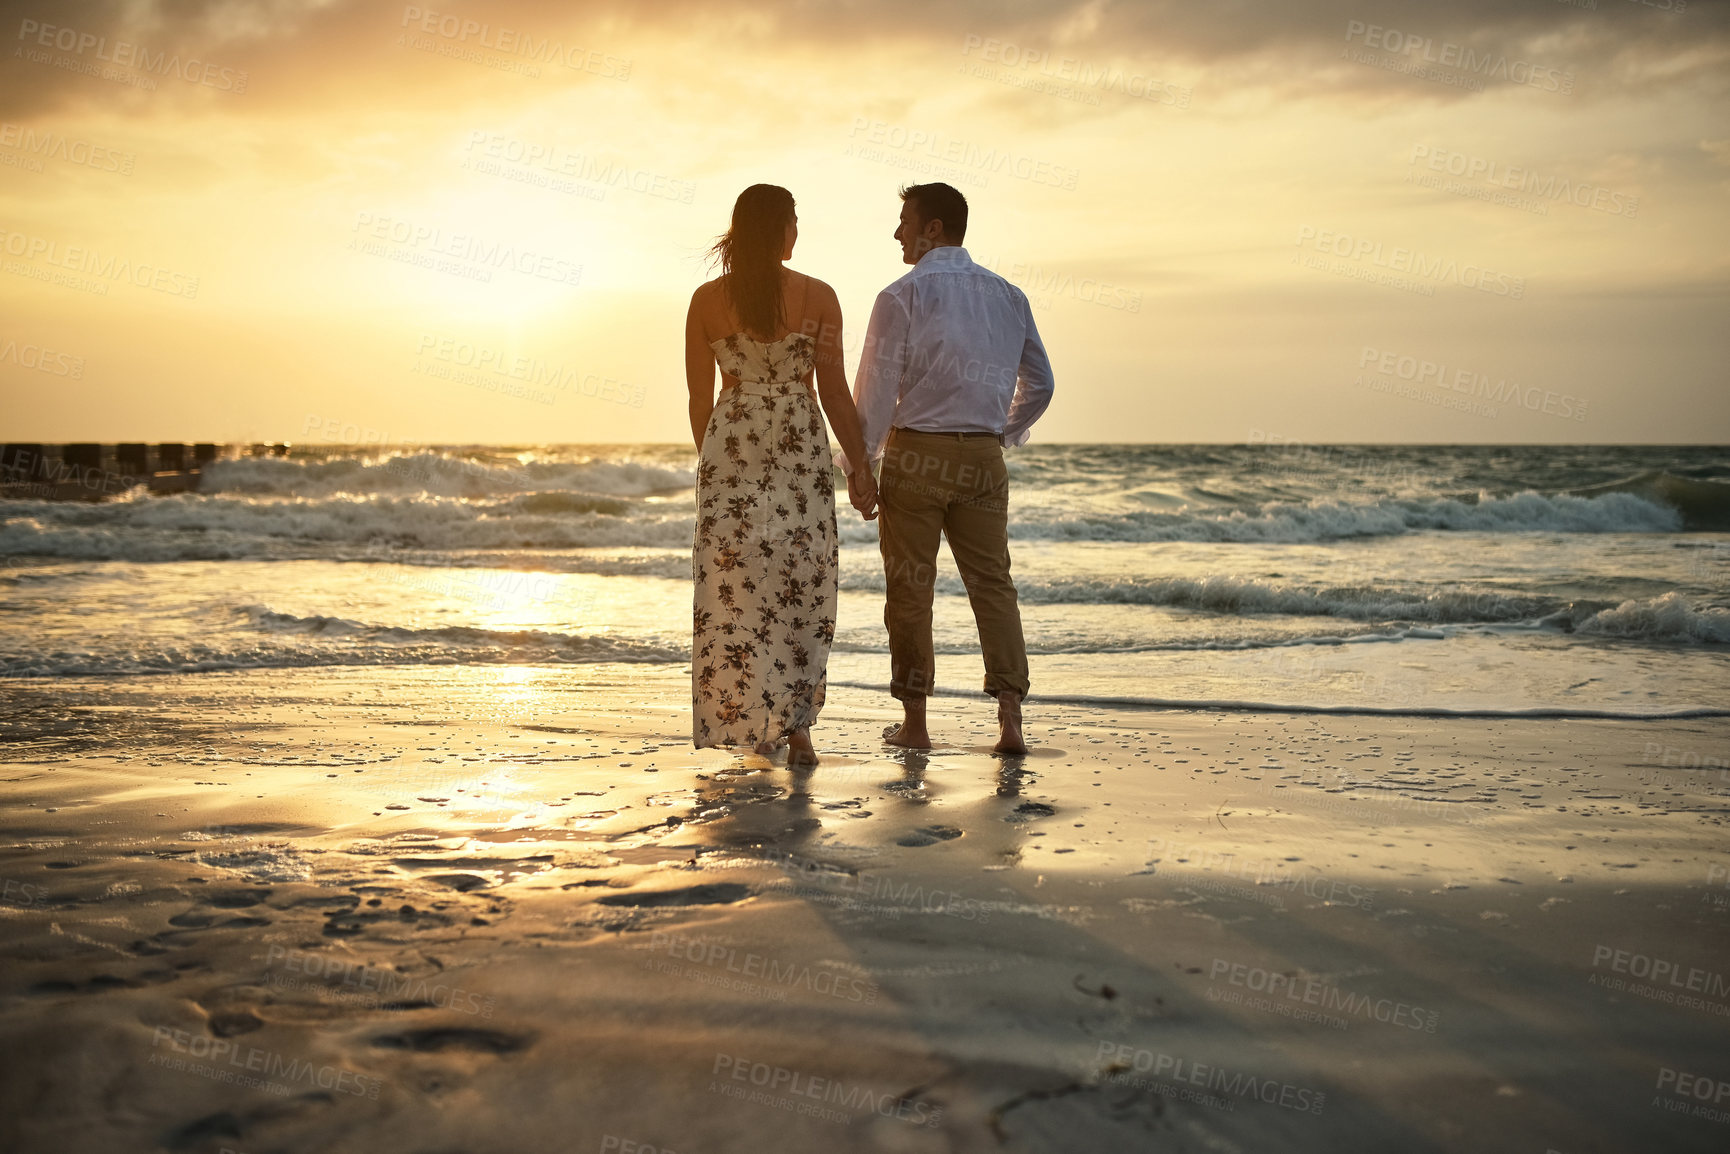 Buy stock photo Rearview shot of an affectionate young couple holding hands while standing face to face on the beach